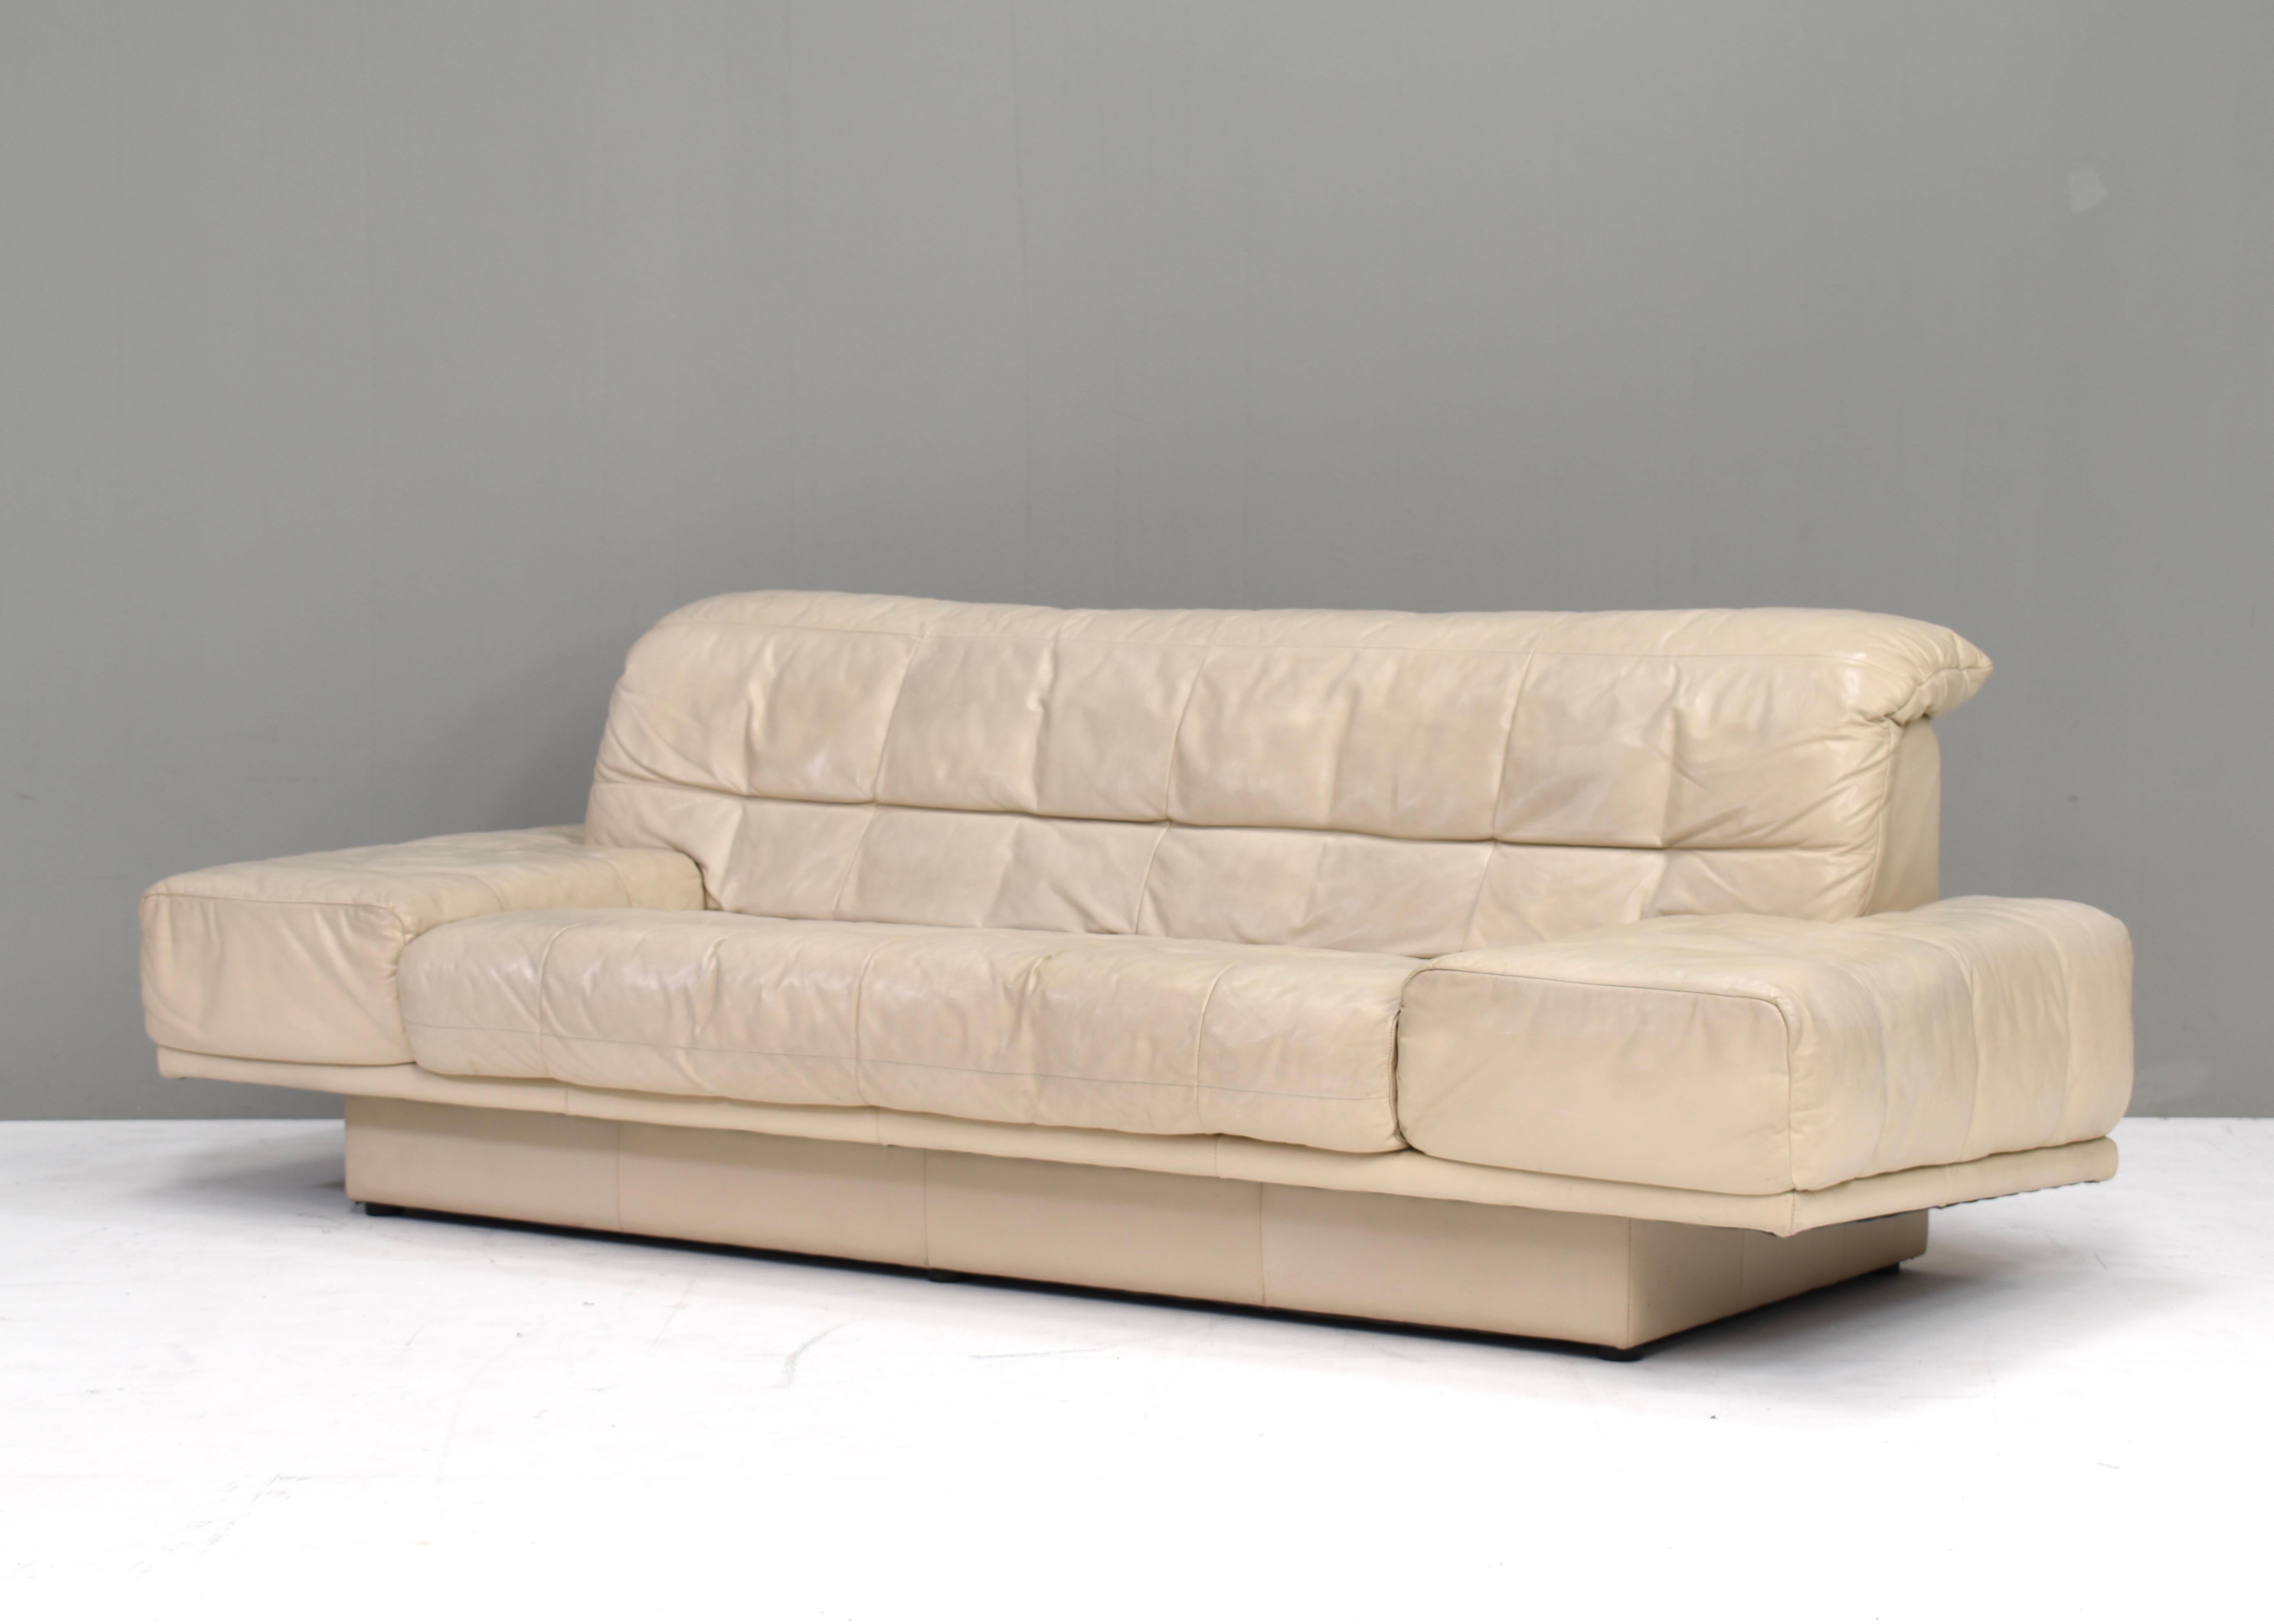 Rolf Benz 3-seat sofa in Ivory Cream Leather – Germany, circa 1980-1990 In Good Condition For Sale In Pijnacker, Zuid-Holland